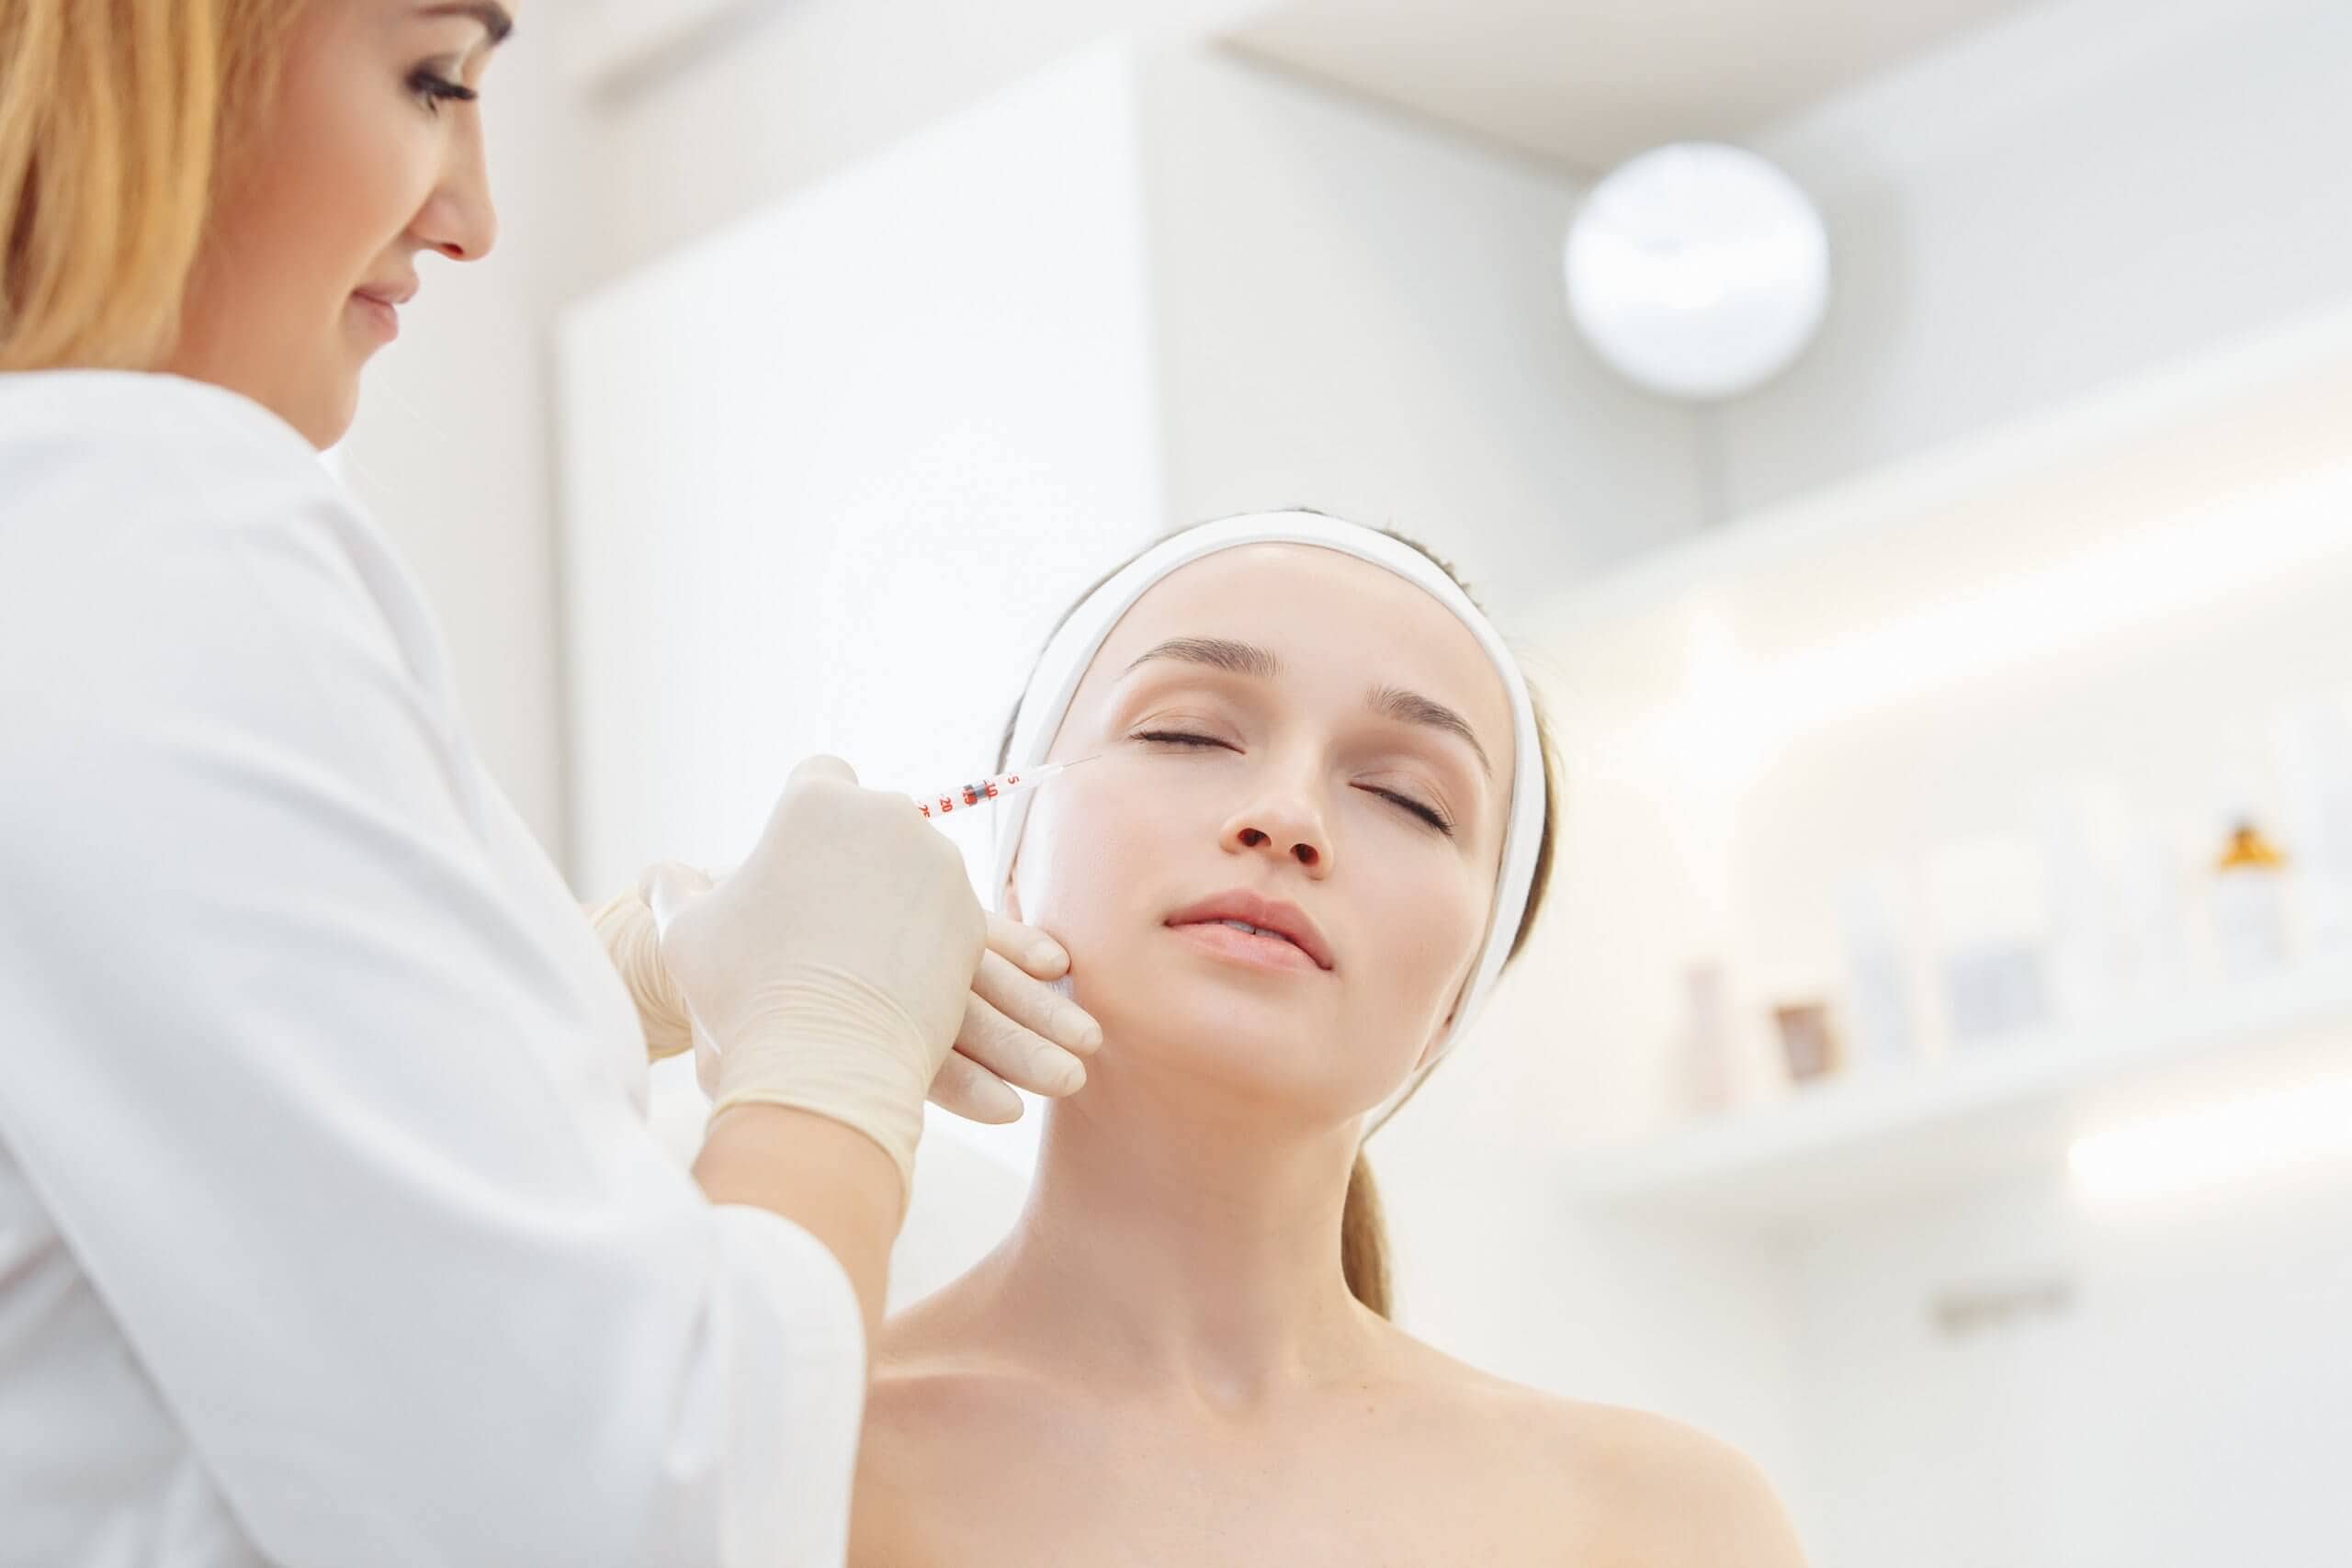 How Long Do Kybella Injections Last